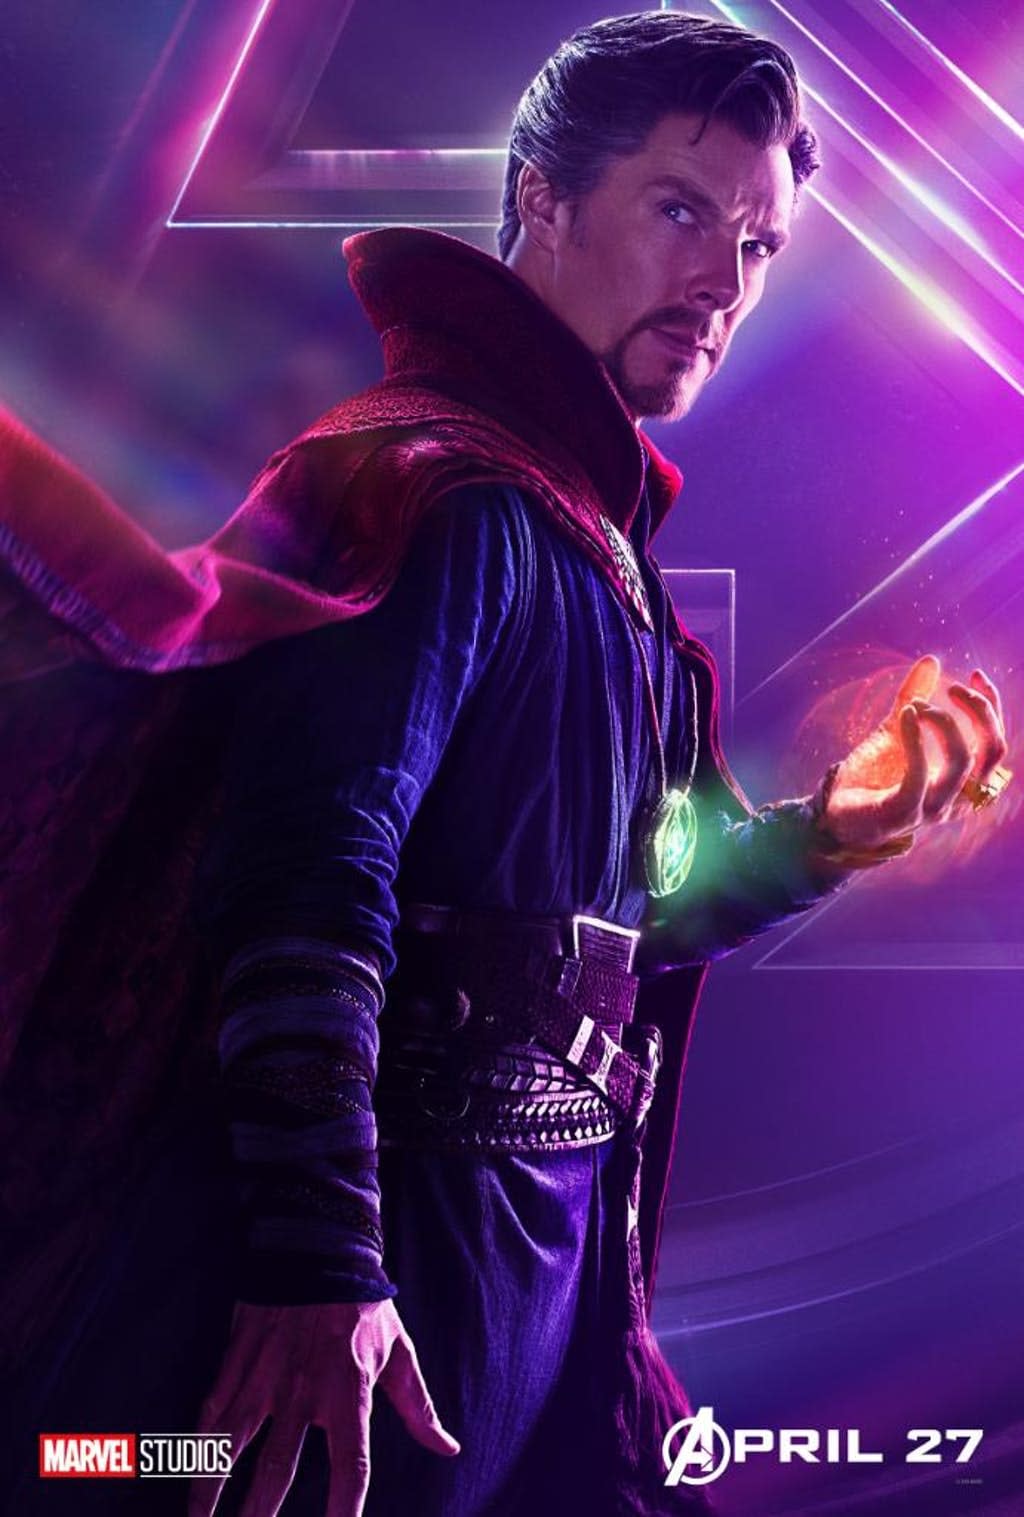 Don't Count on Doctor Strange Making it Out of Avengers: Infinity War, According to Benedict Cumberbatch